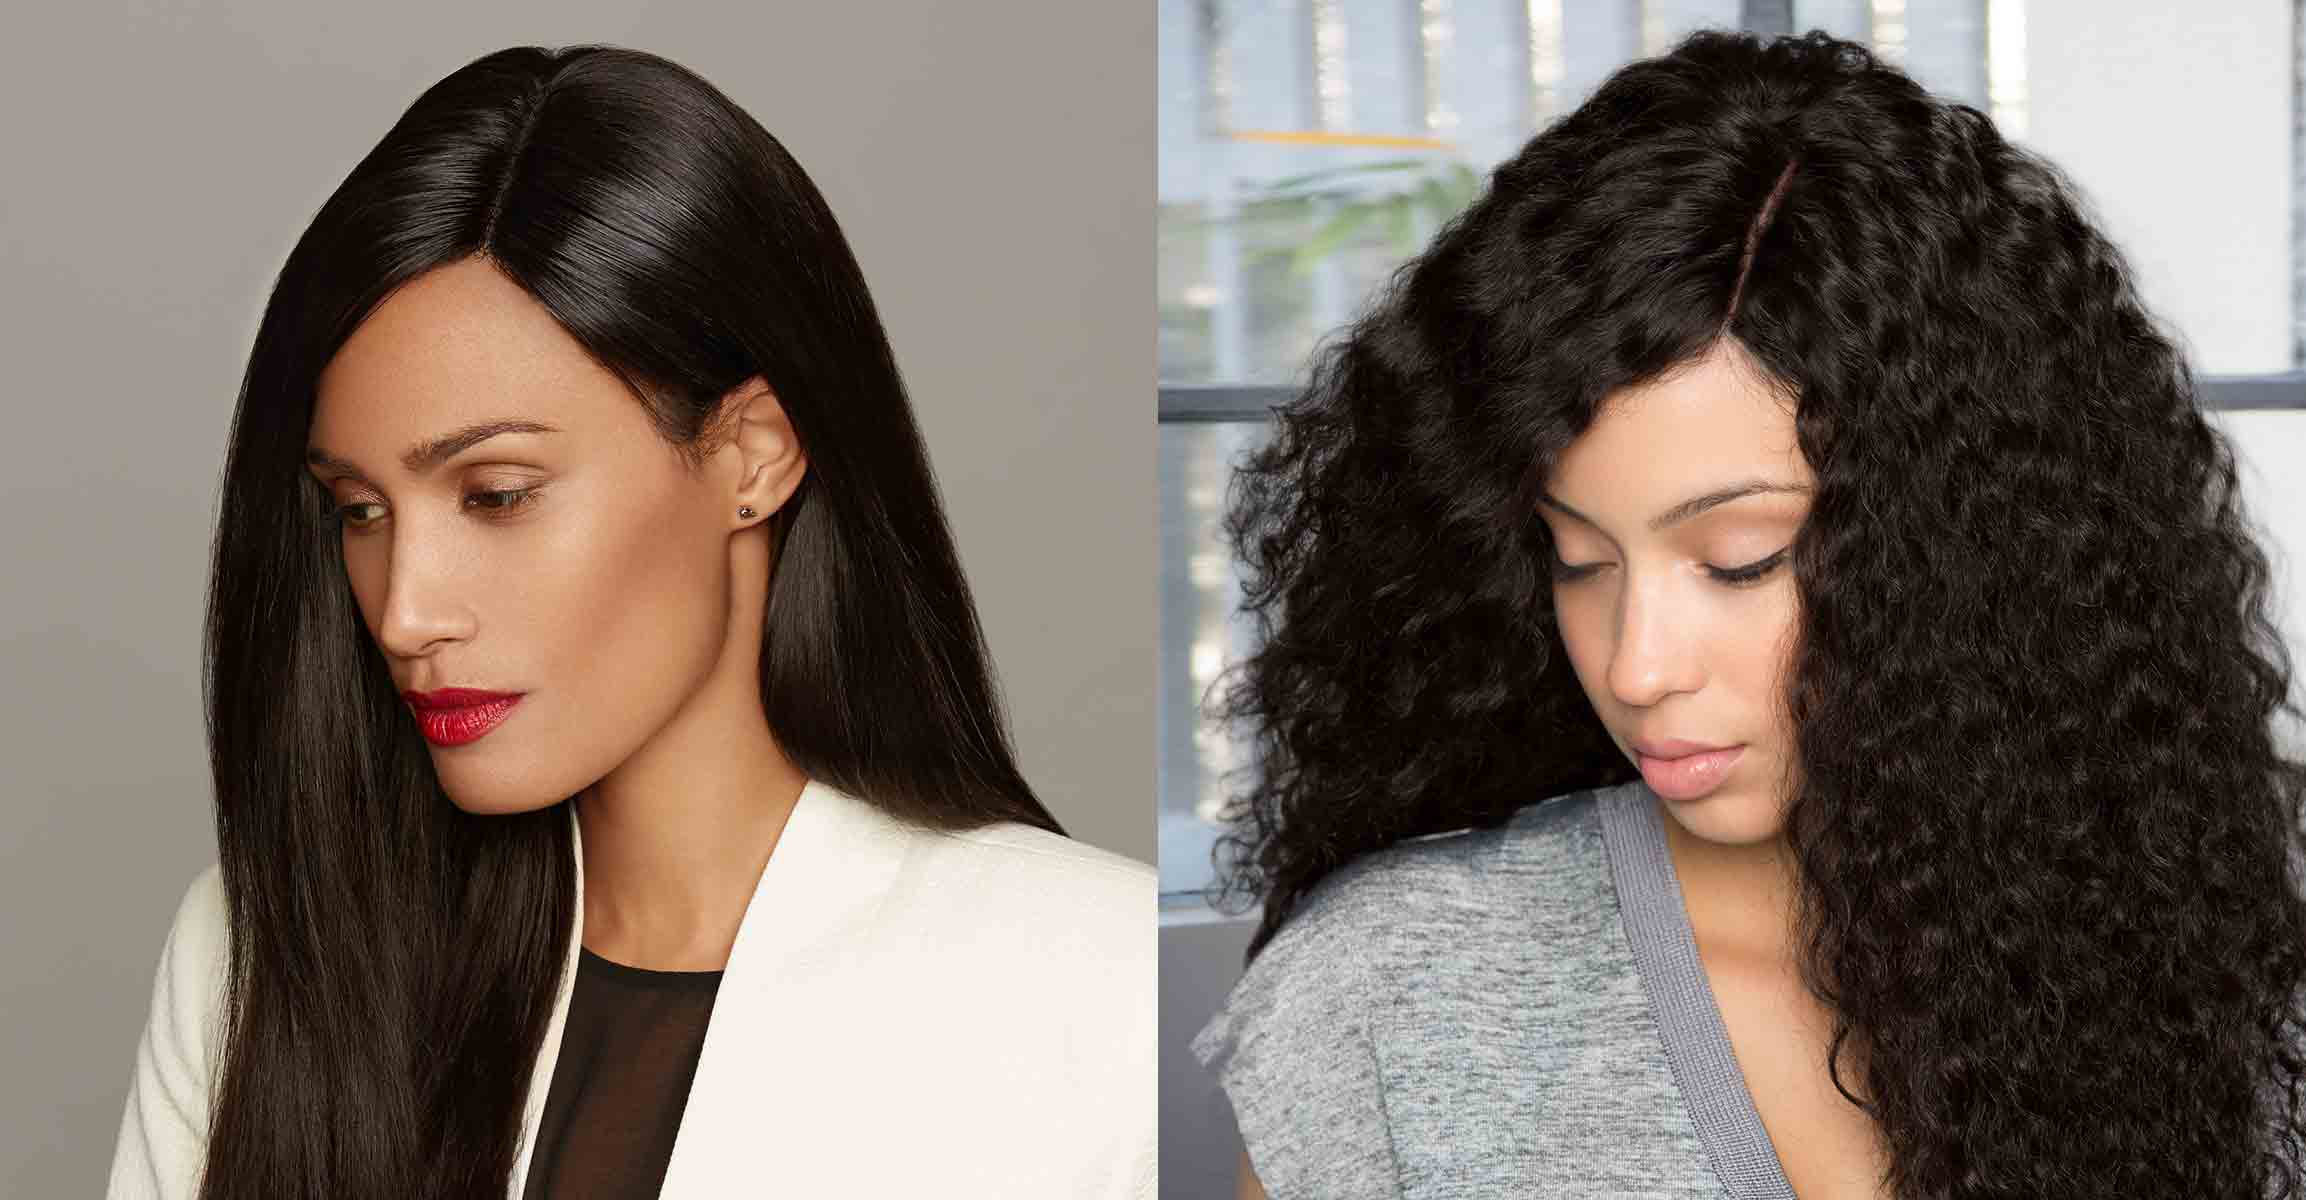 What is a Hair Frontal VS Closure?